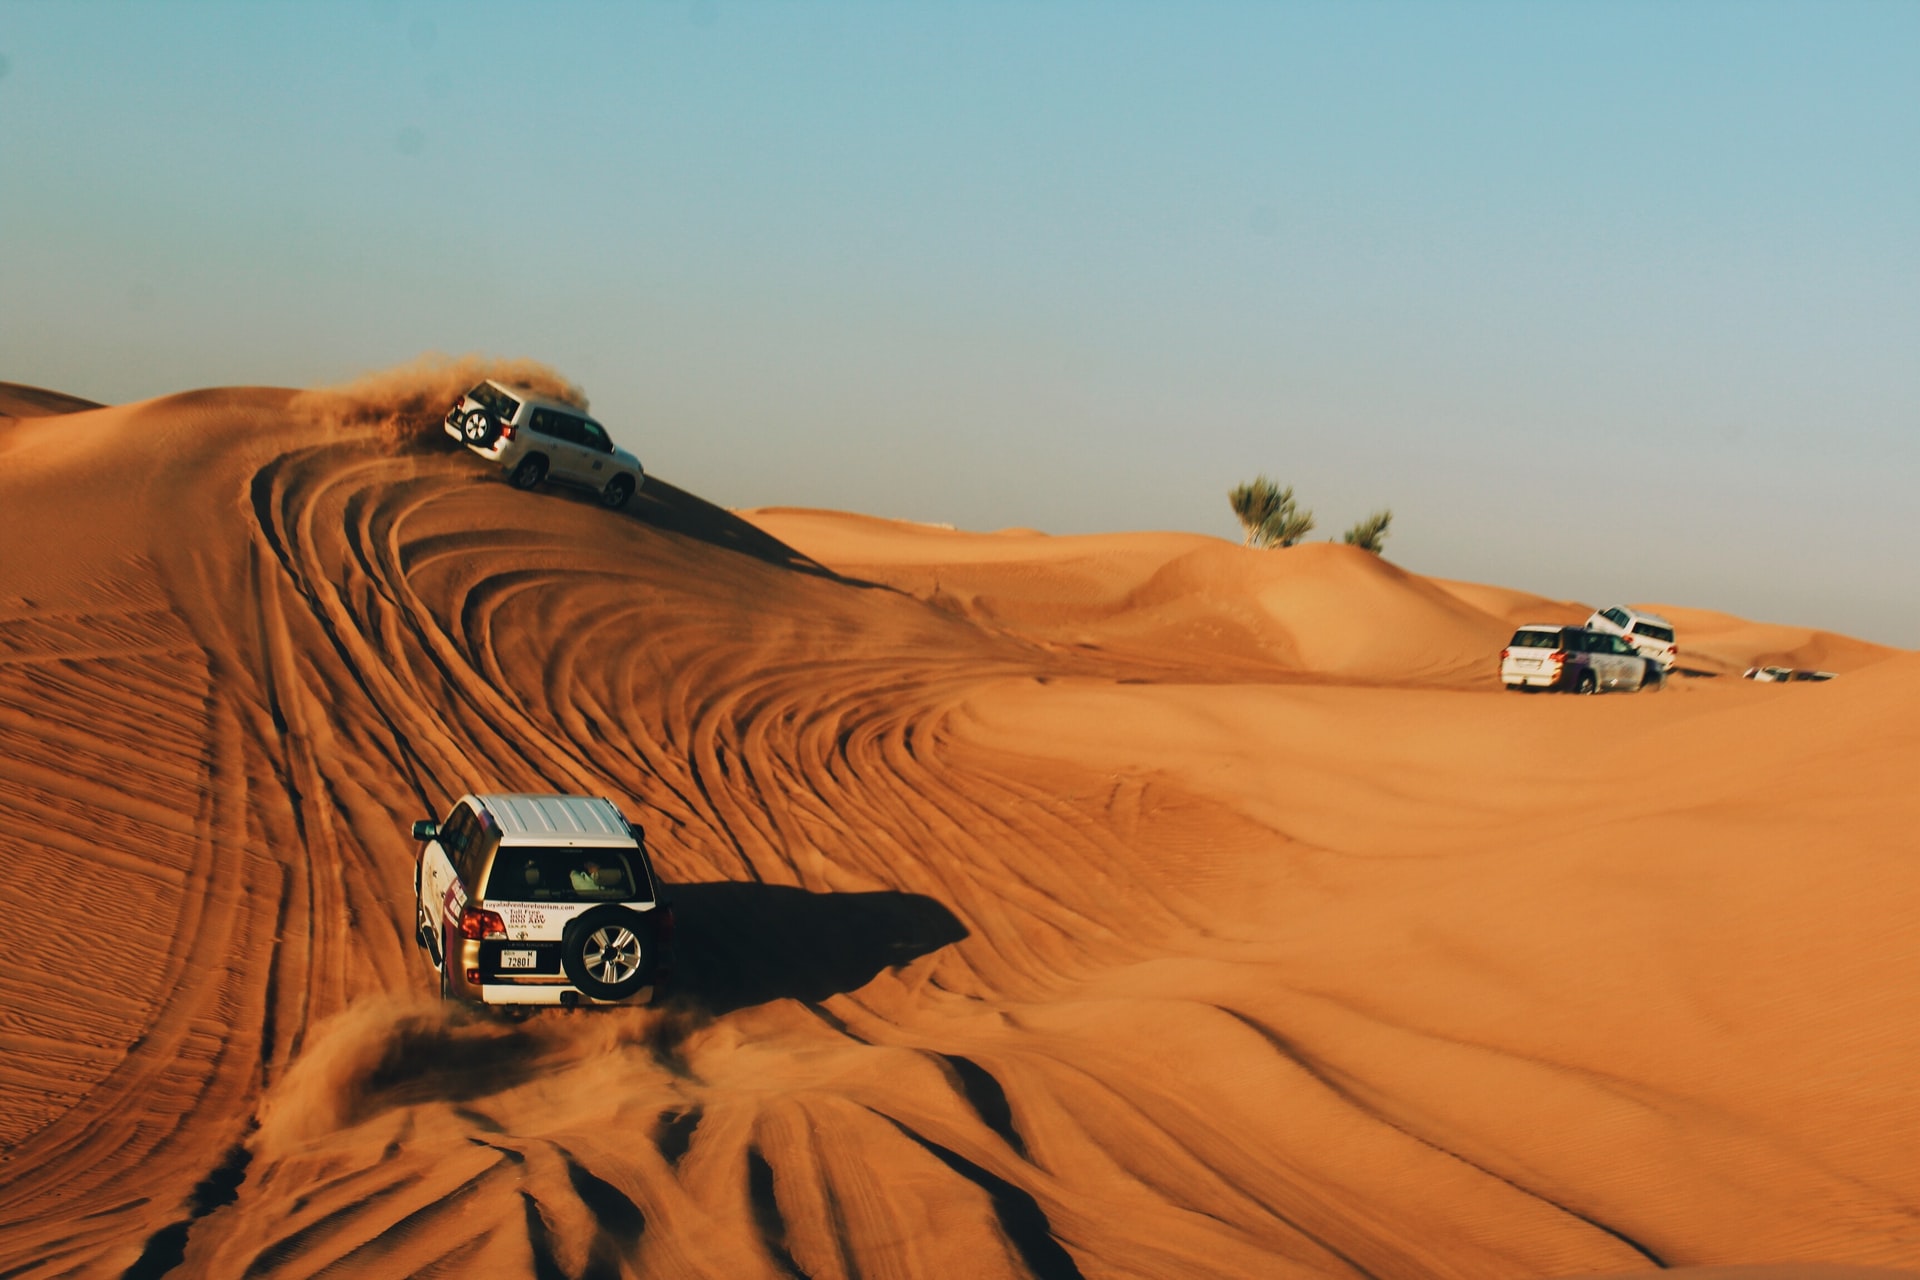 <p>In Dubai, the top recommendations are sand surfing (going down in the dunes in a table, a quad, or a jeep) a tour in camel, and a BBQ at the Al Khayma camp. The full desert experience.</p> <p>Image: Unsplash - Alina Grubnyak</p>